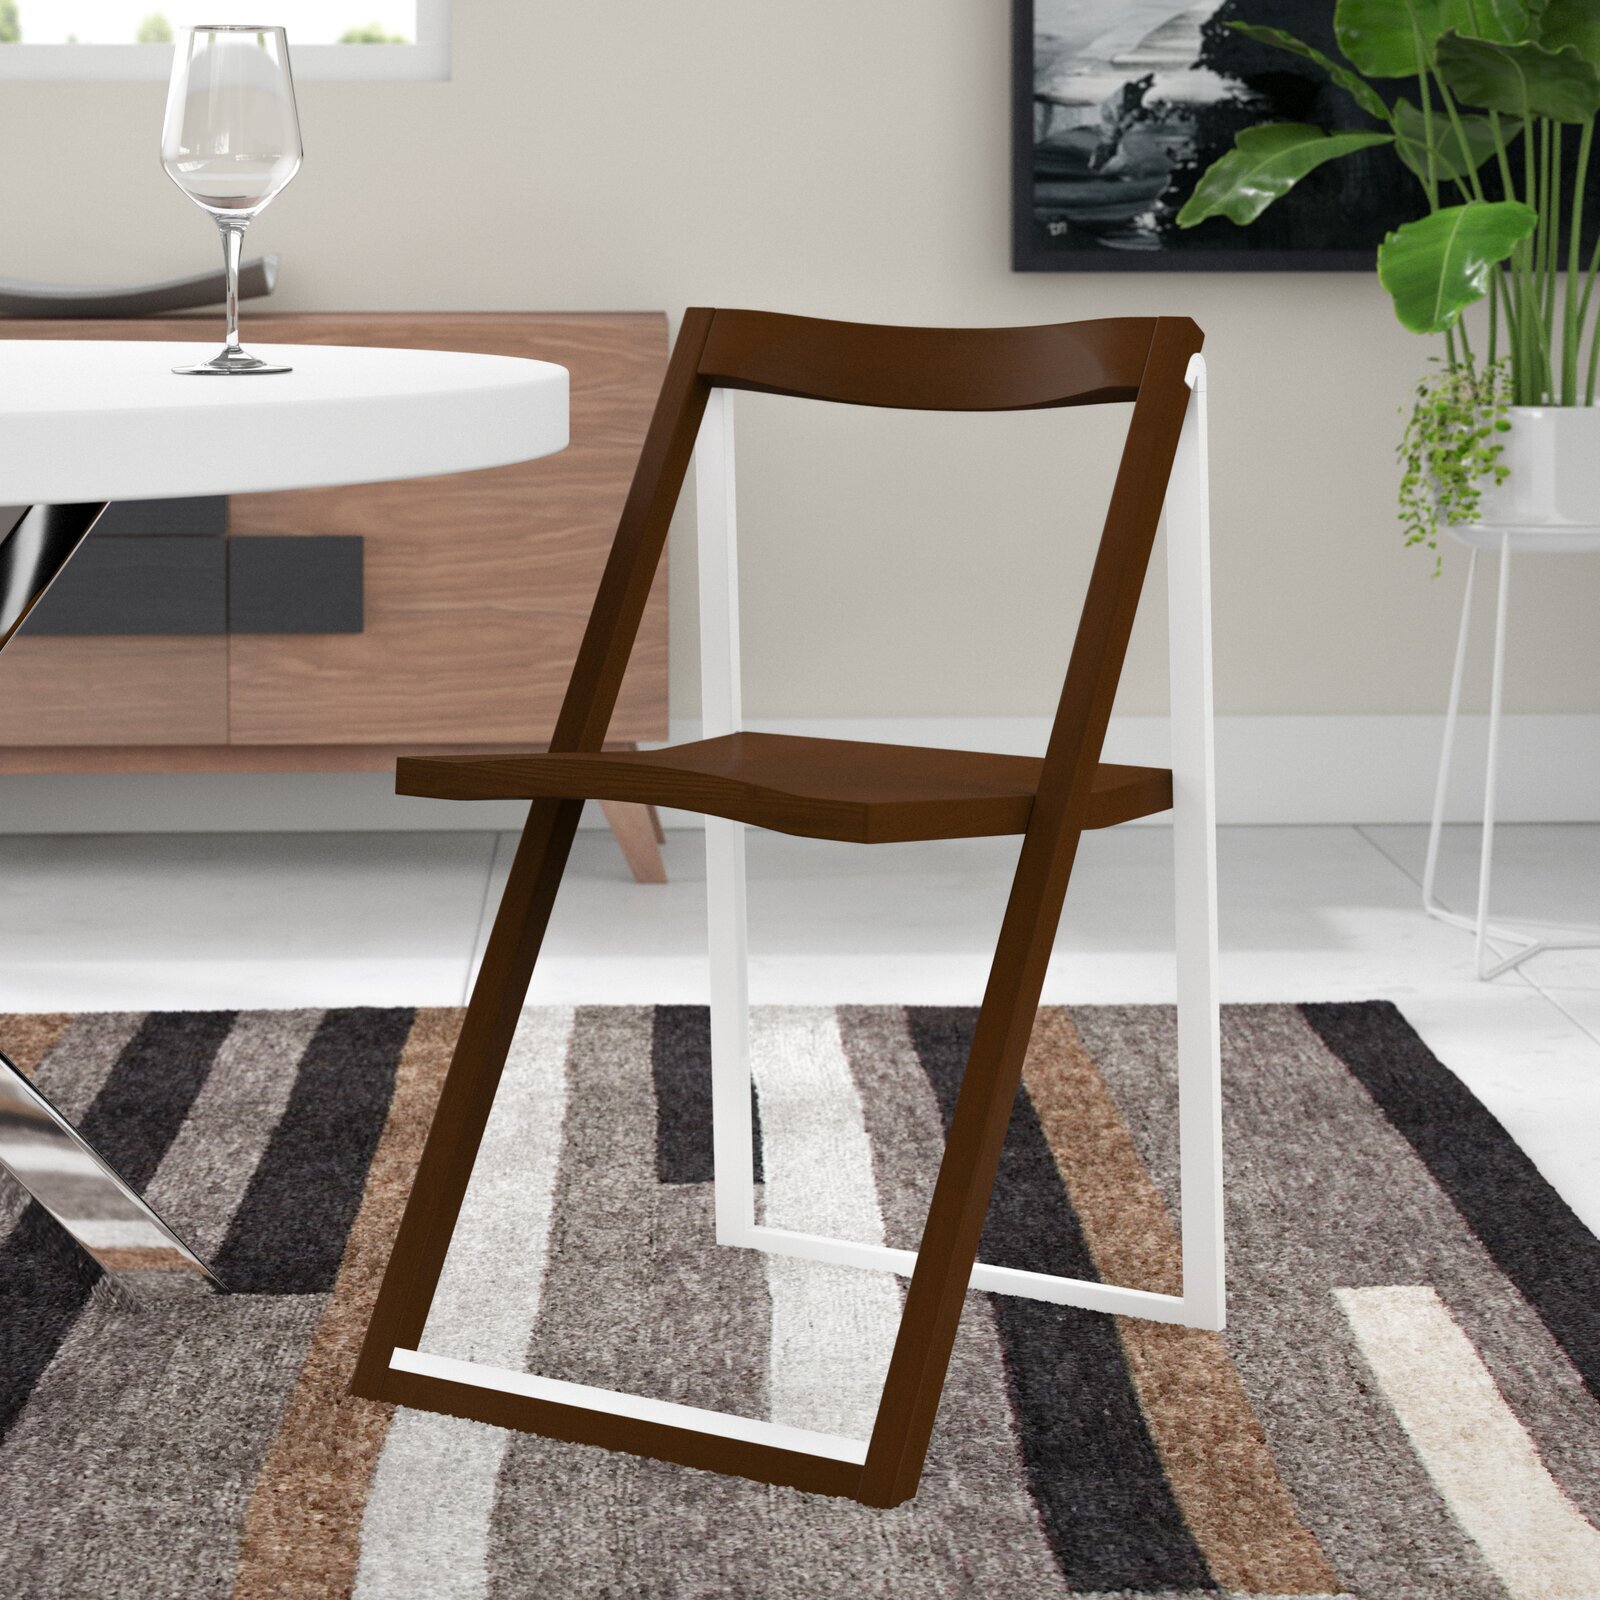 Contemporary folding dining chairs